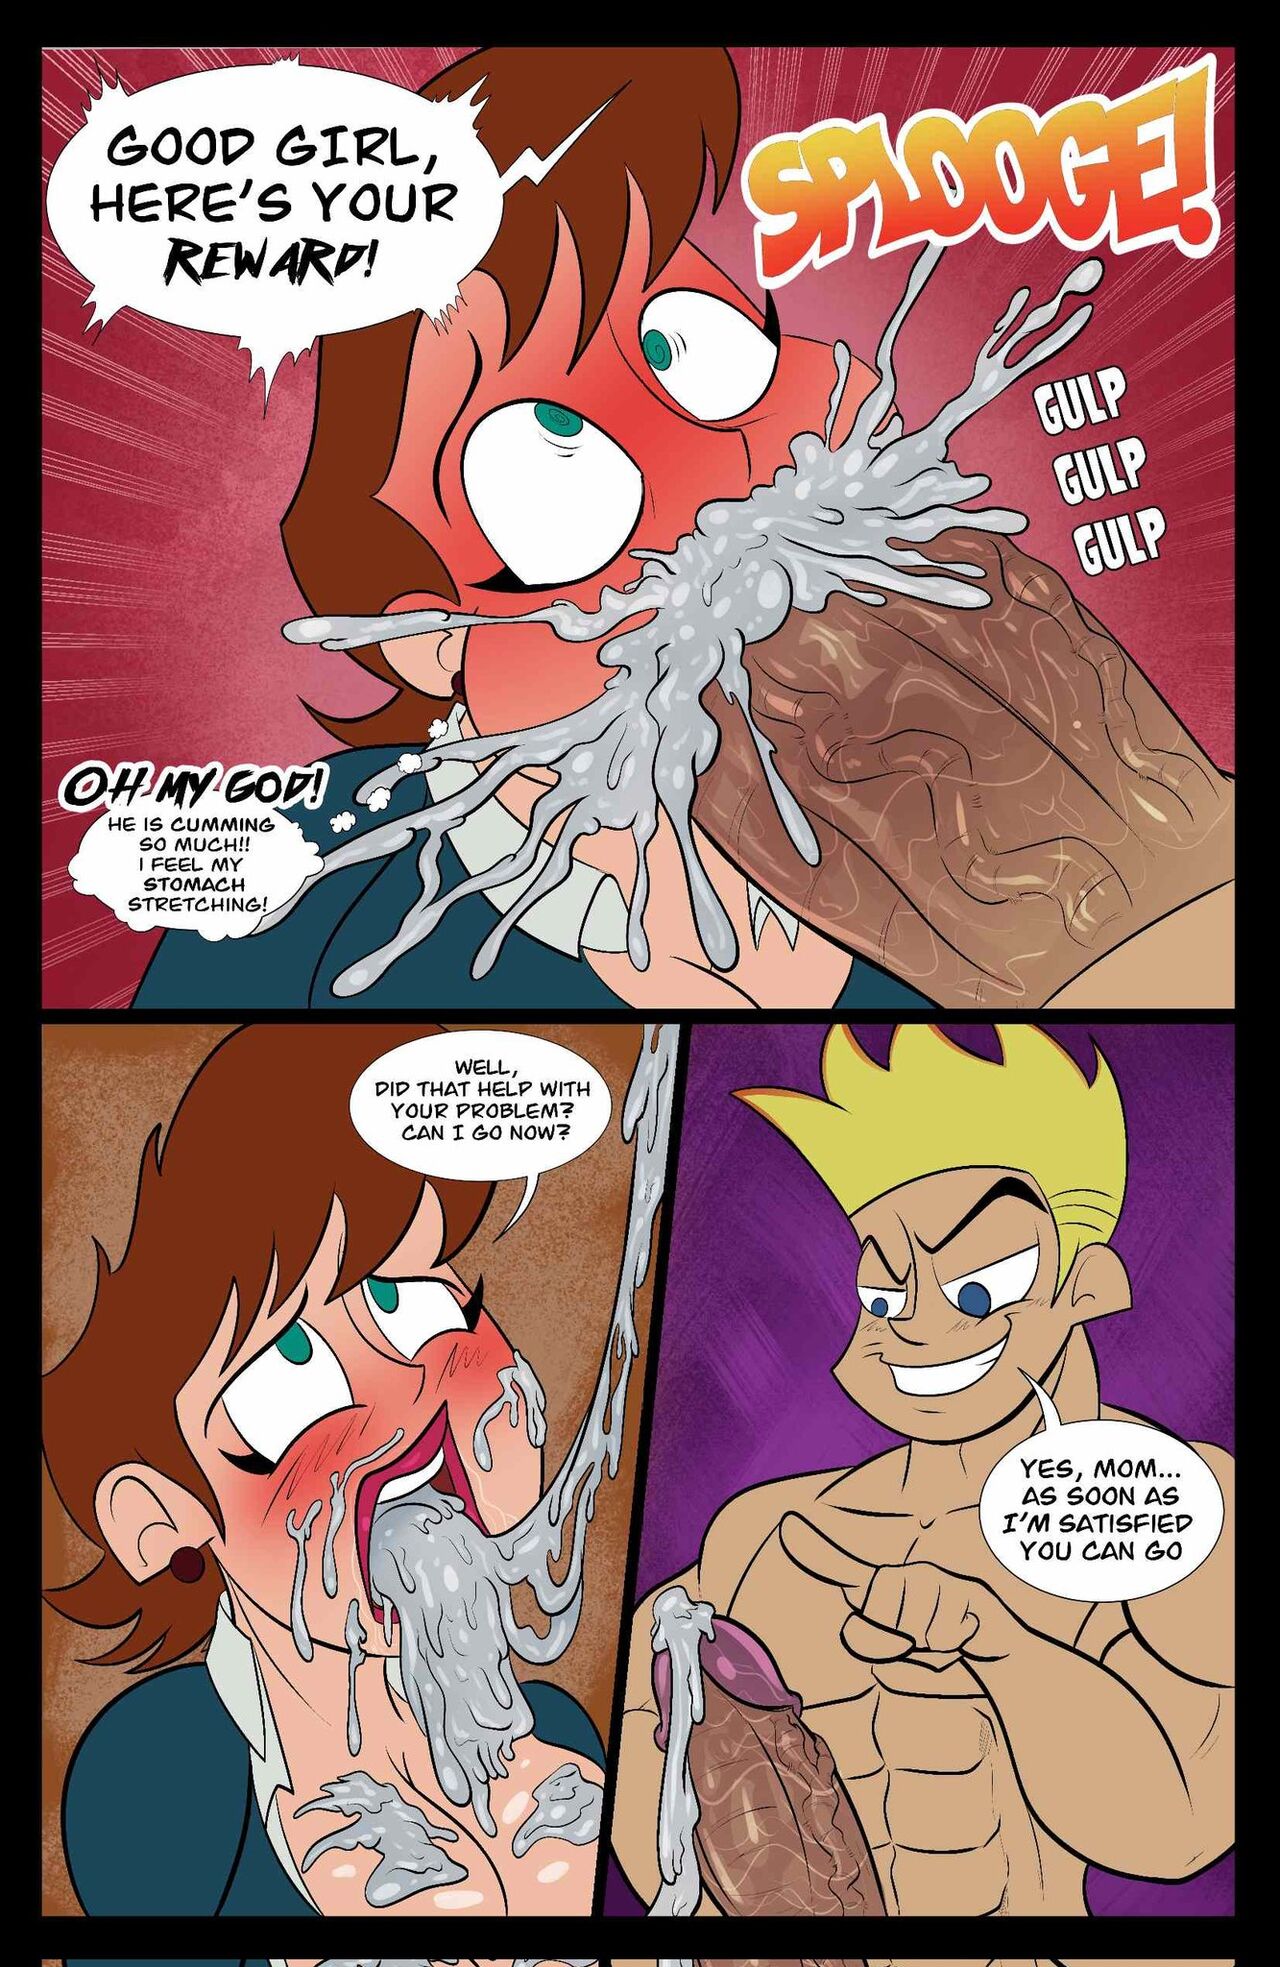 Test subjects – Johnny Test [ameizing_lewds]